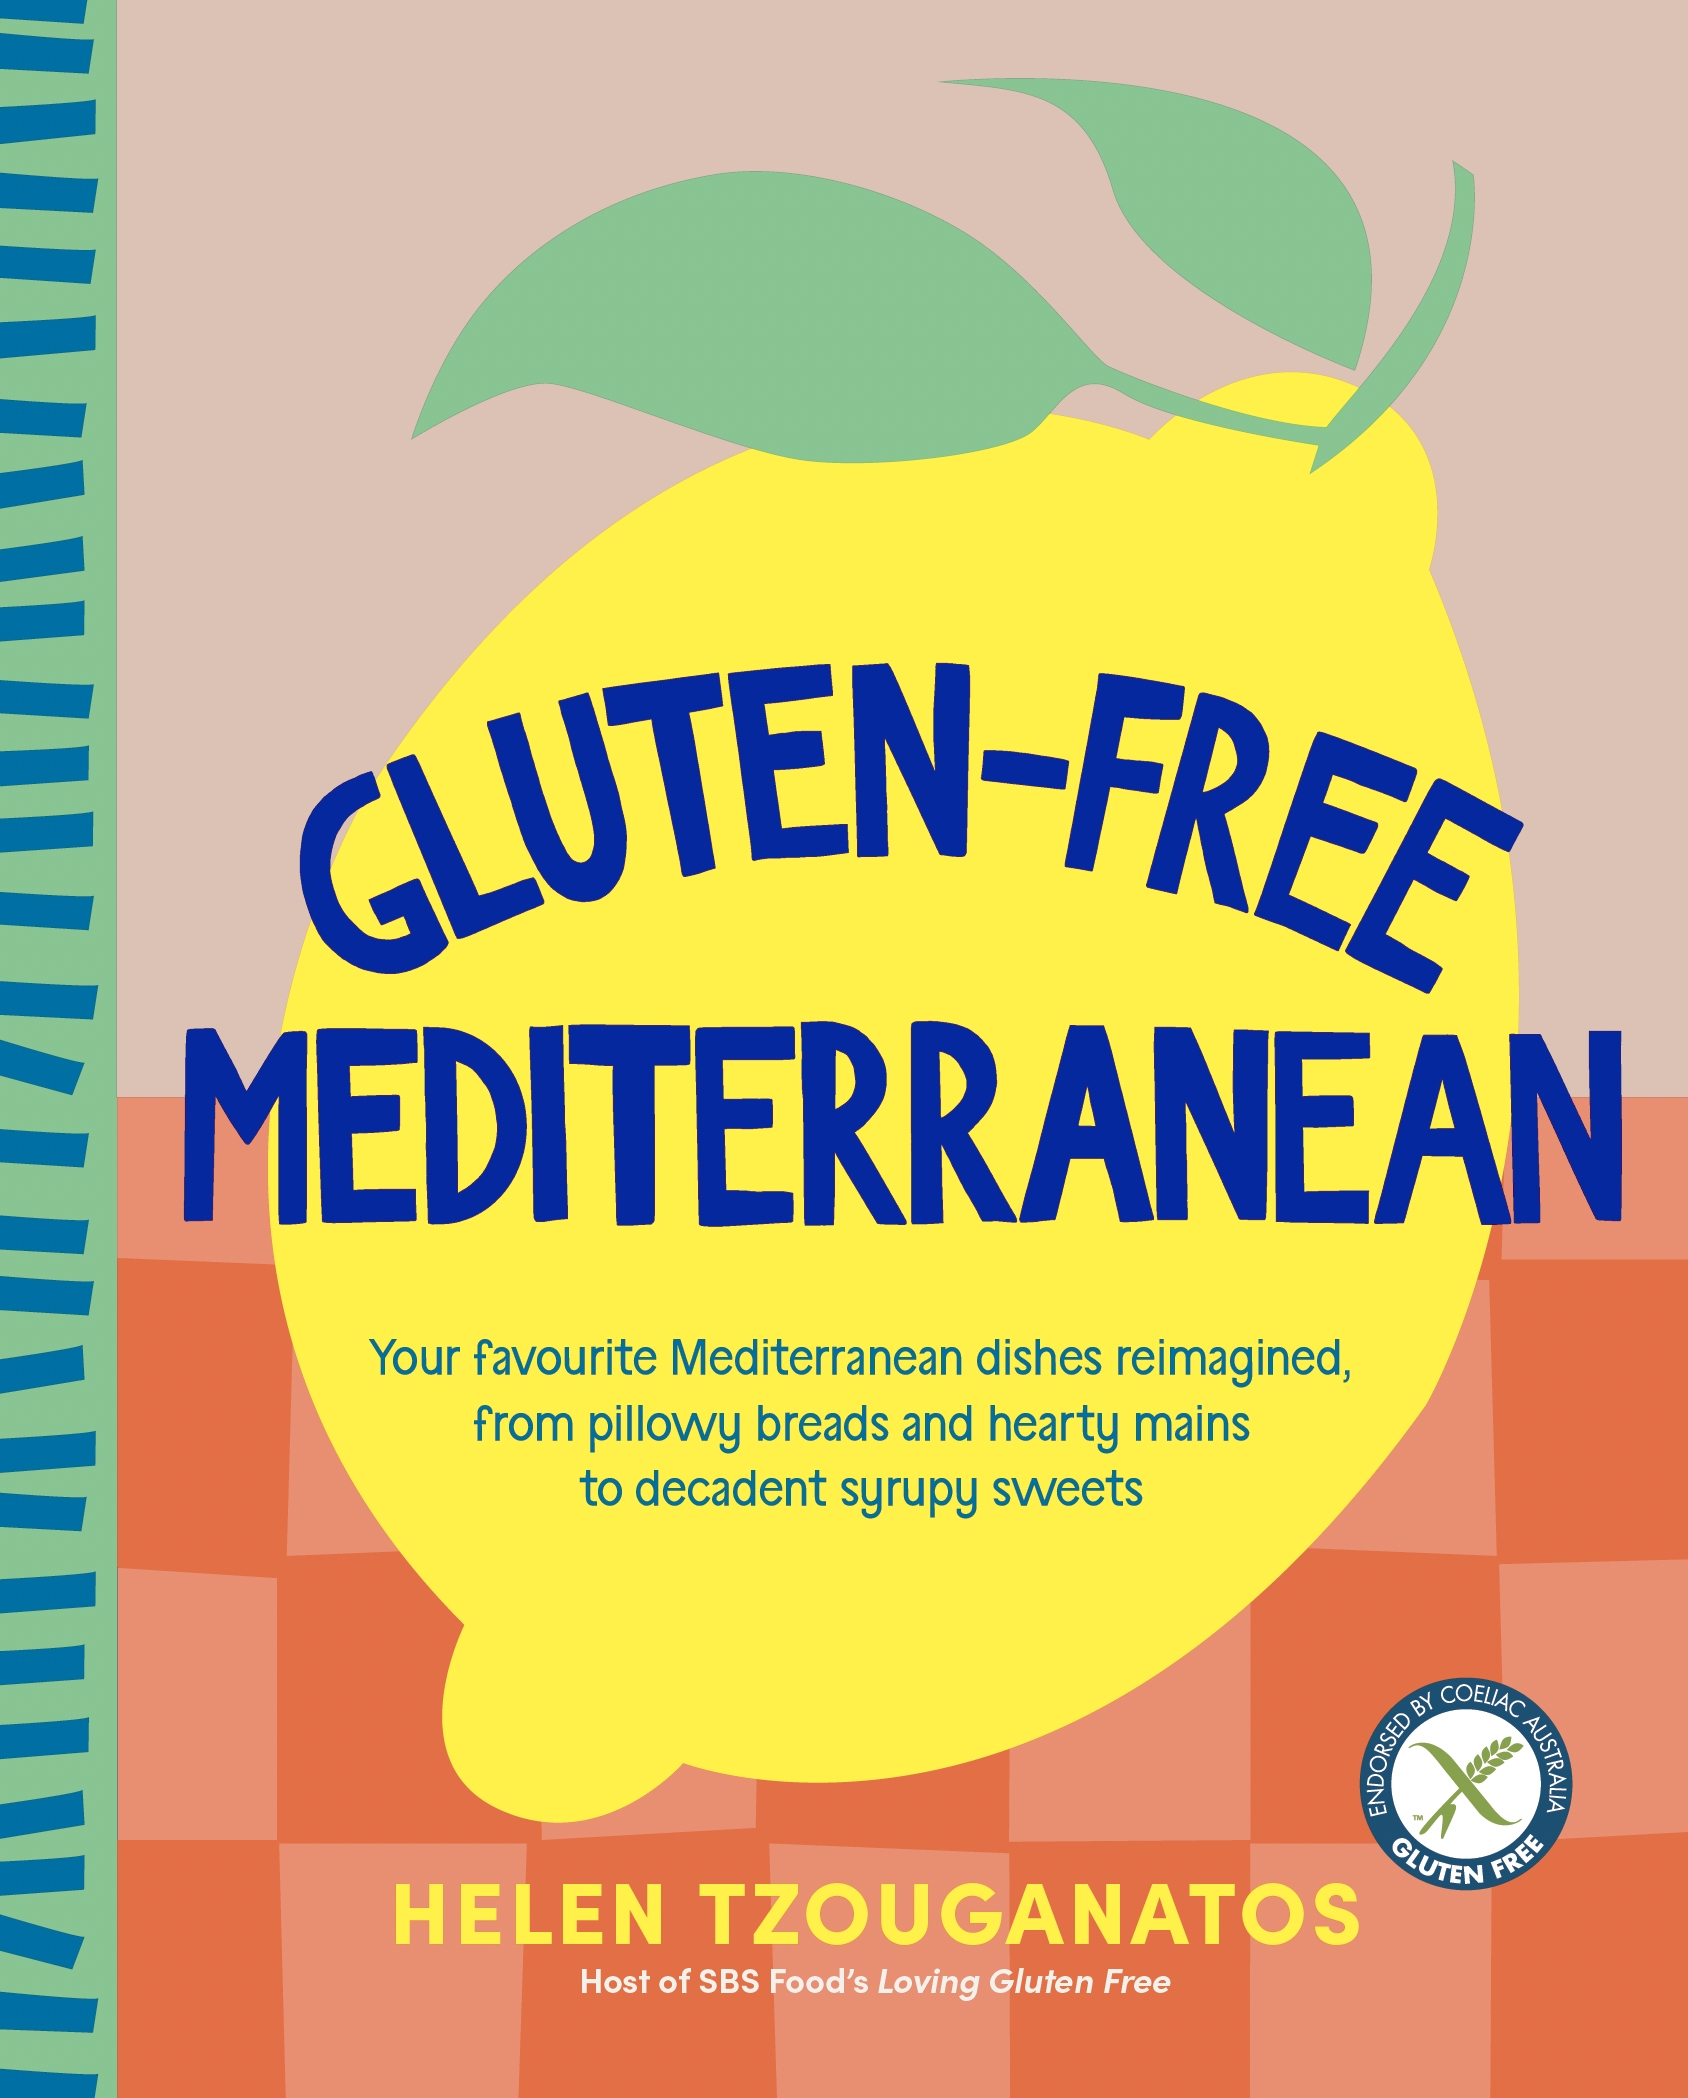 Cover of Gluten-Free Mediterranean featuring a drawing of a lemon.